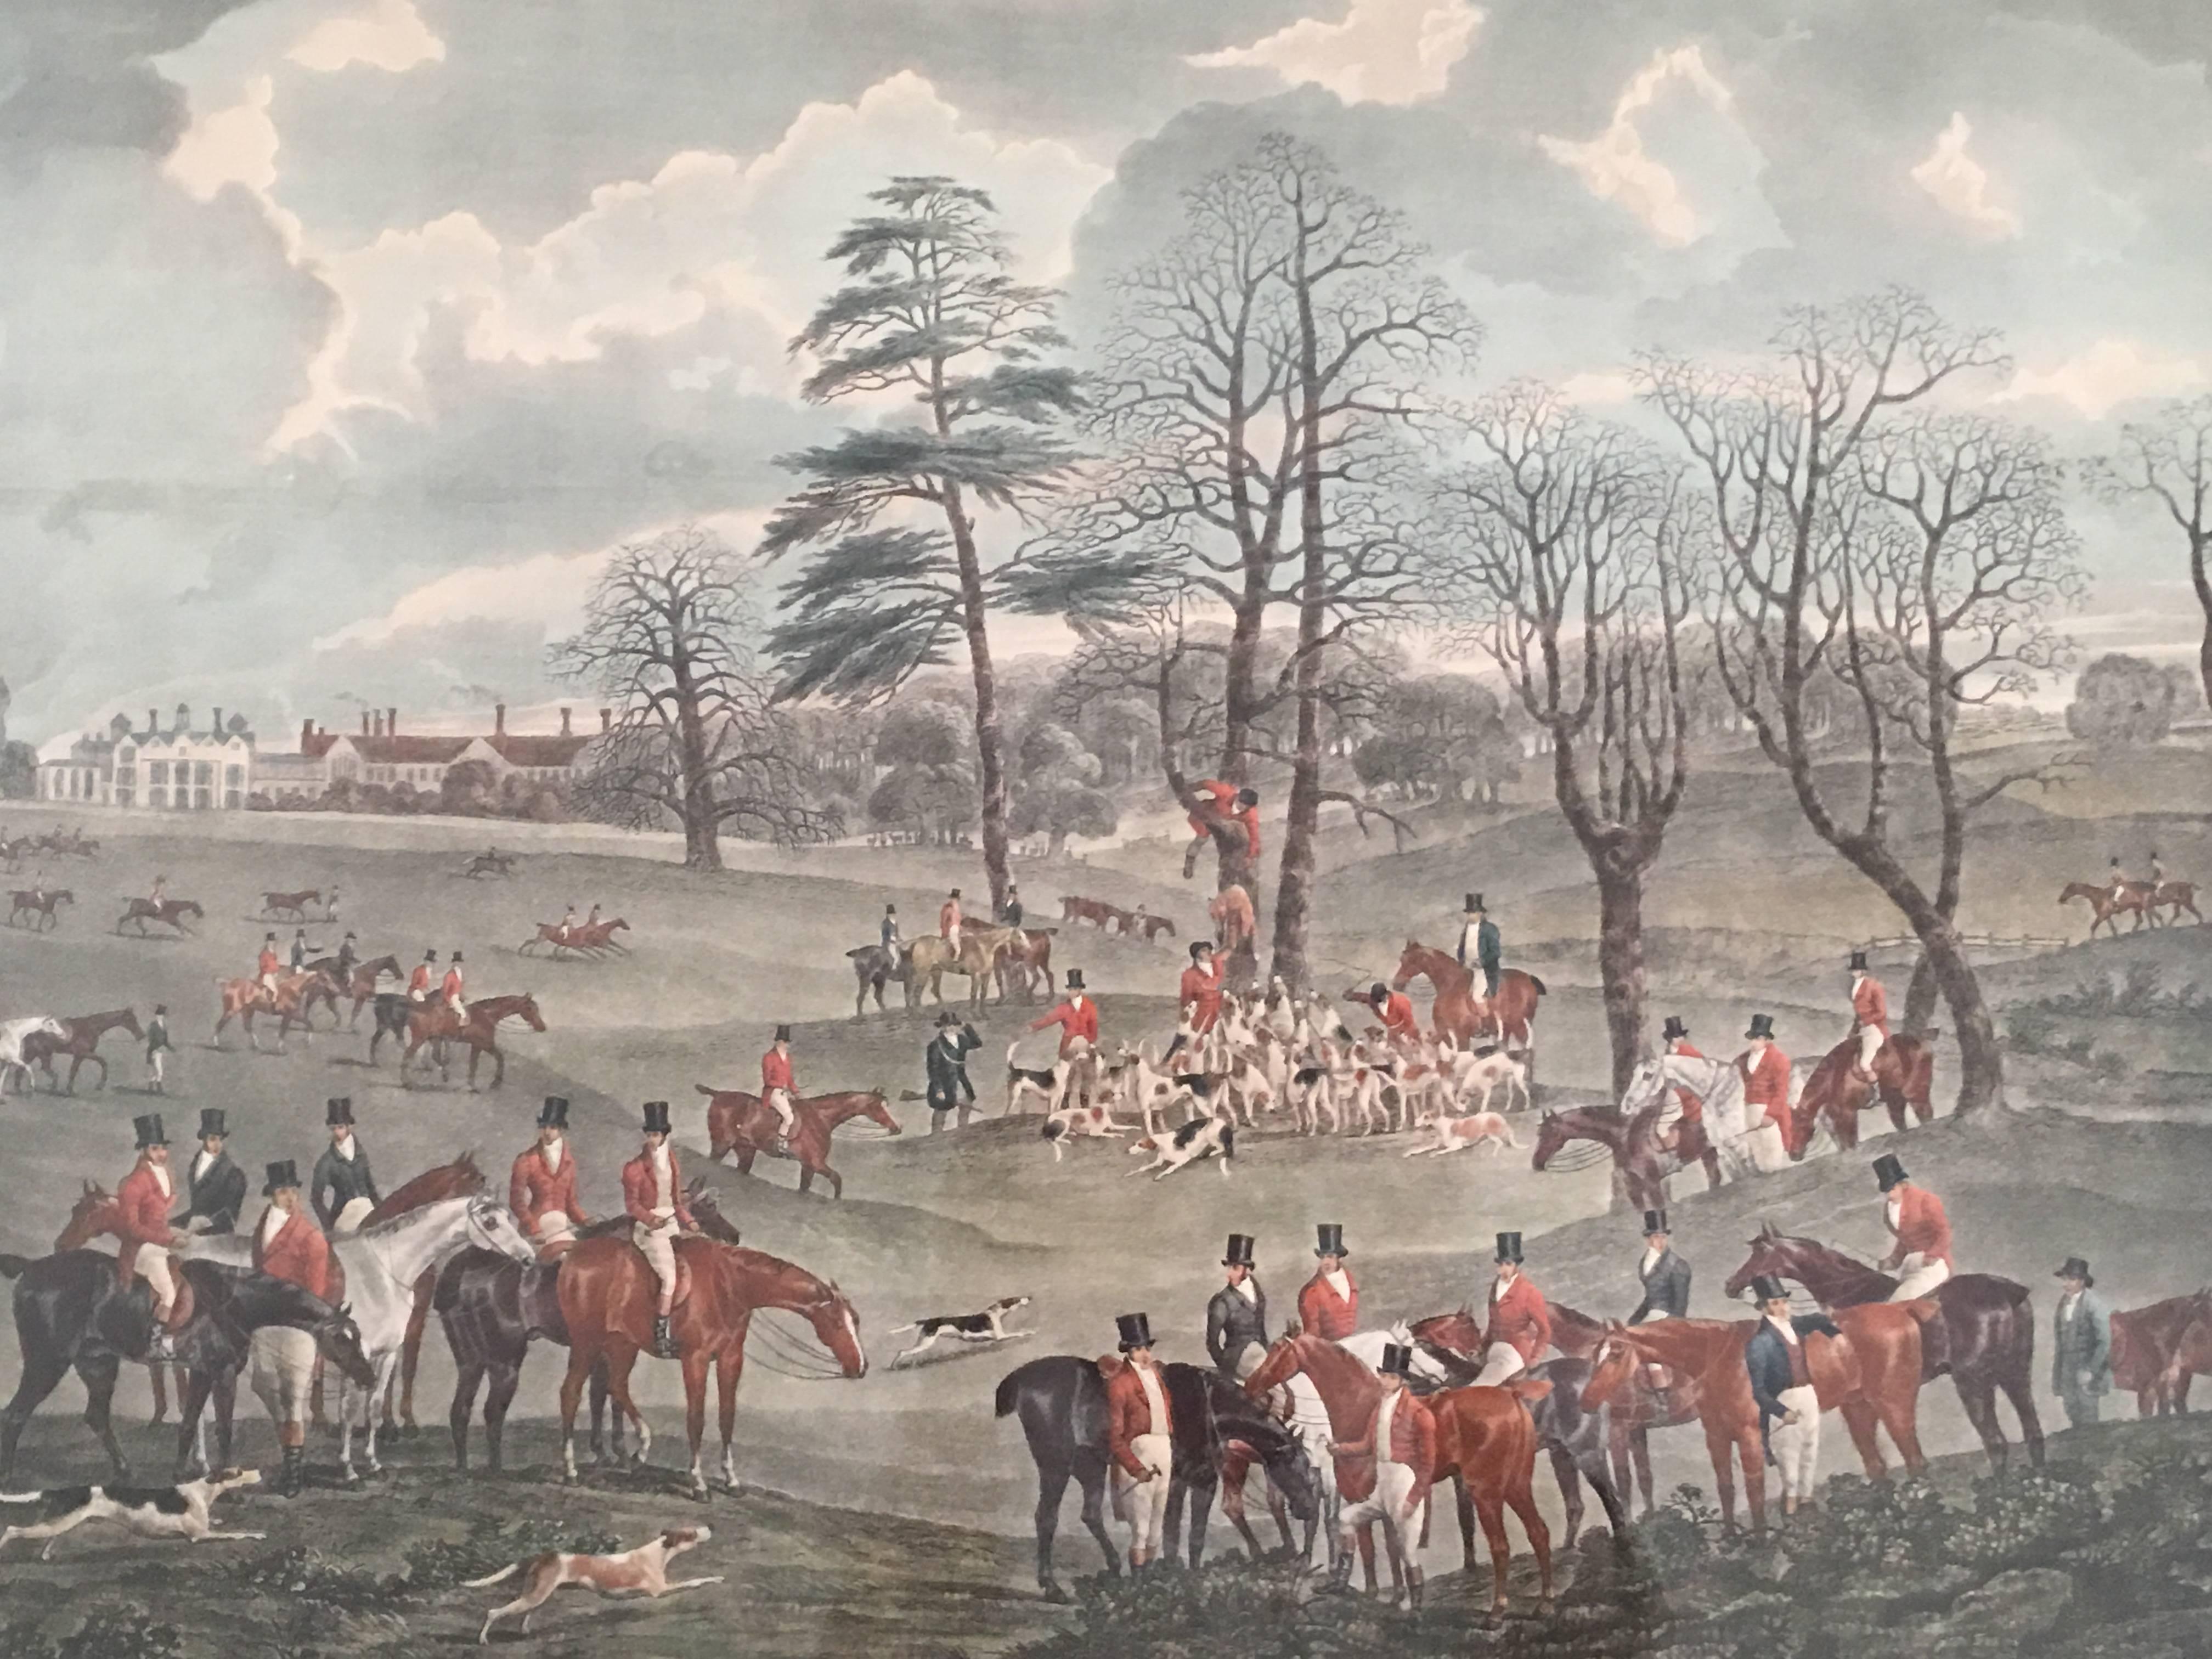 A set of four large English fox hunting prints of The Essex Hunt, published by D. Wolstenholme in London, circa 1831. The large prints depict a fox hunting scene with many people, horses and dogs in a panoramic countryside, beautifully colored and